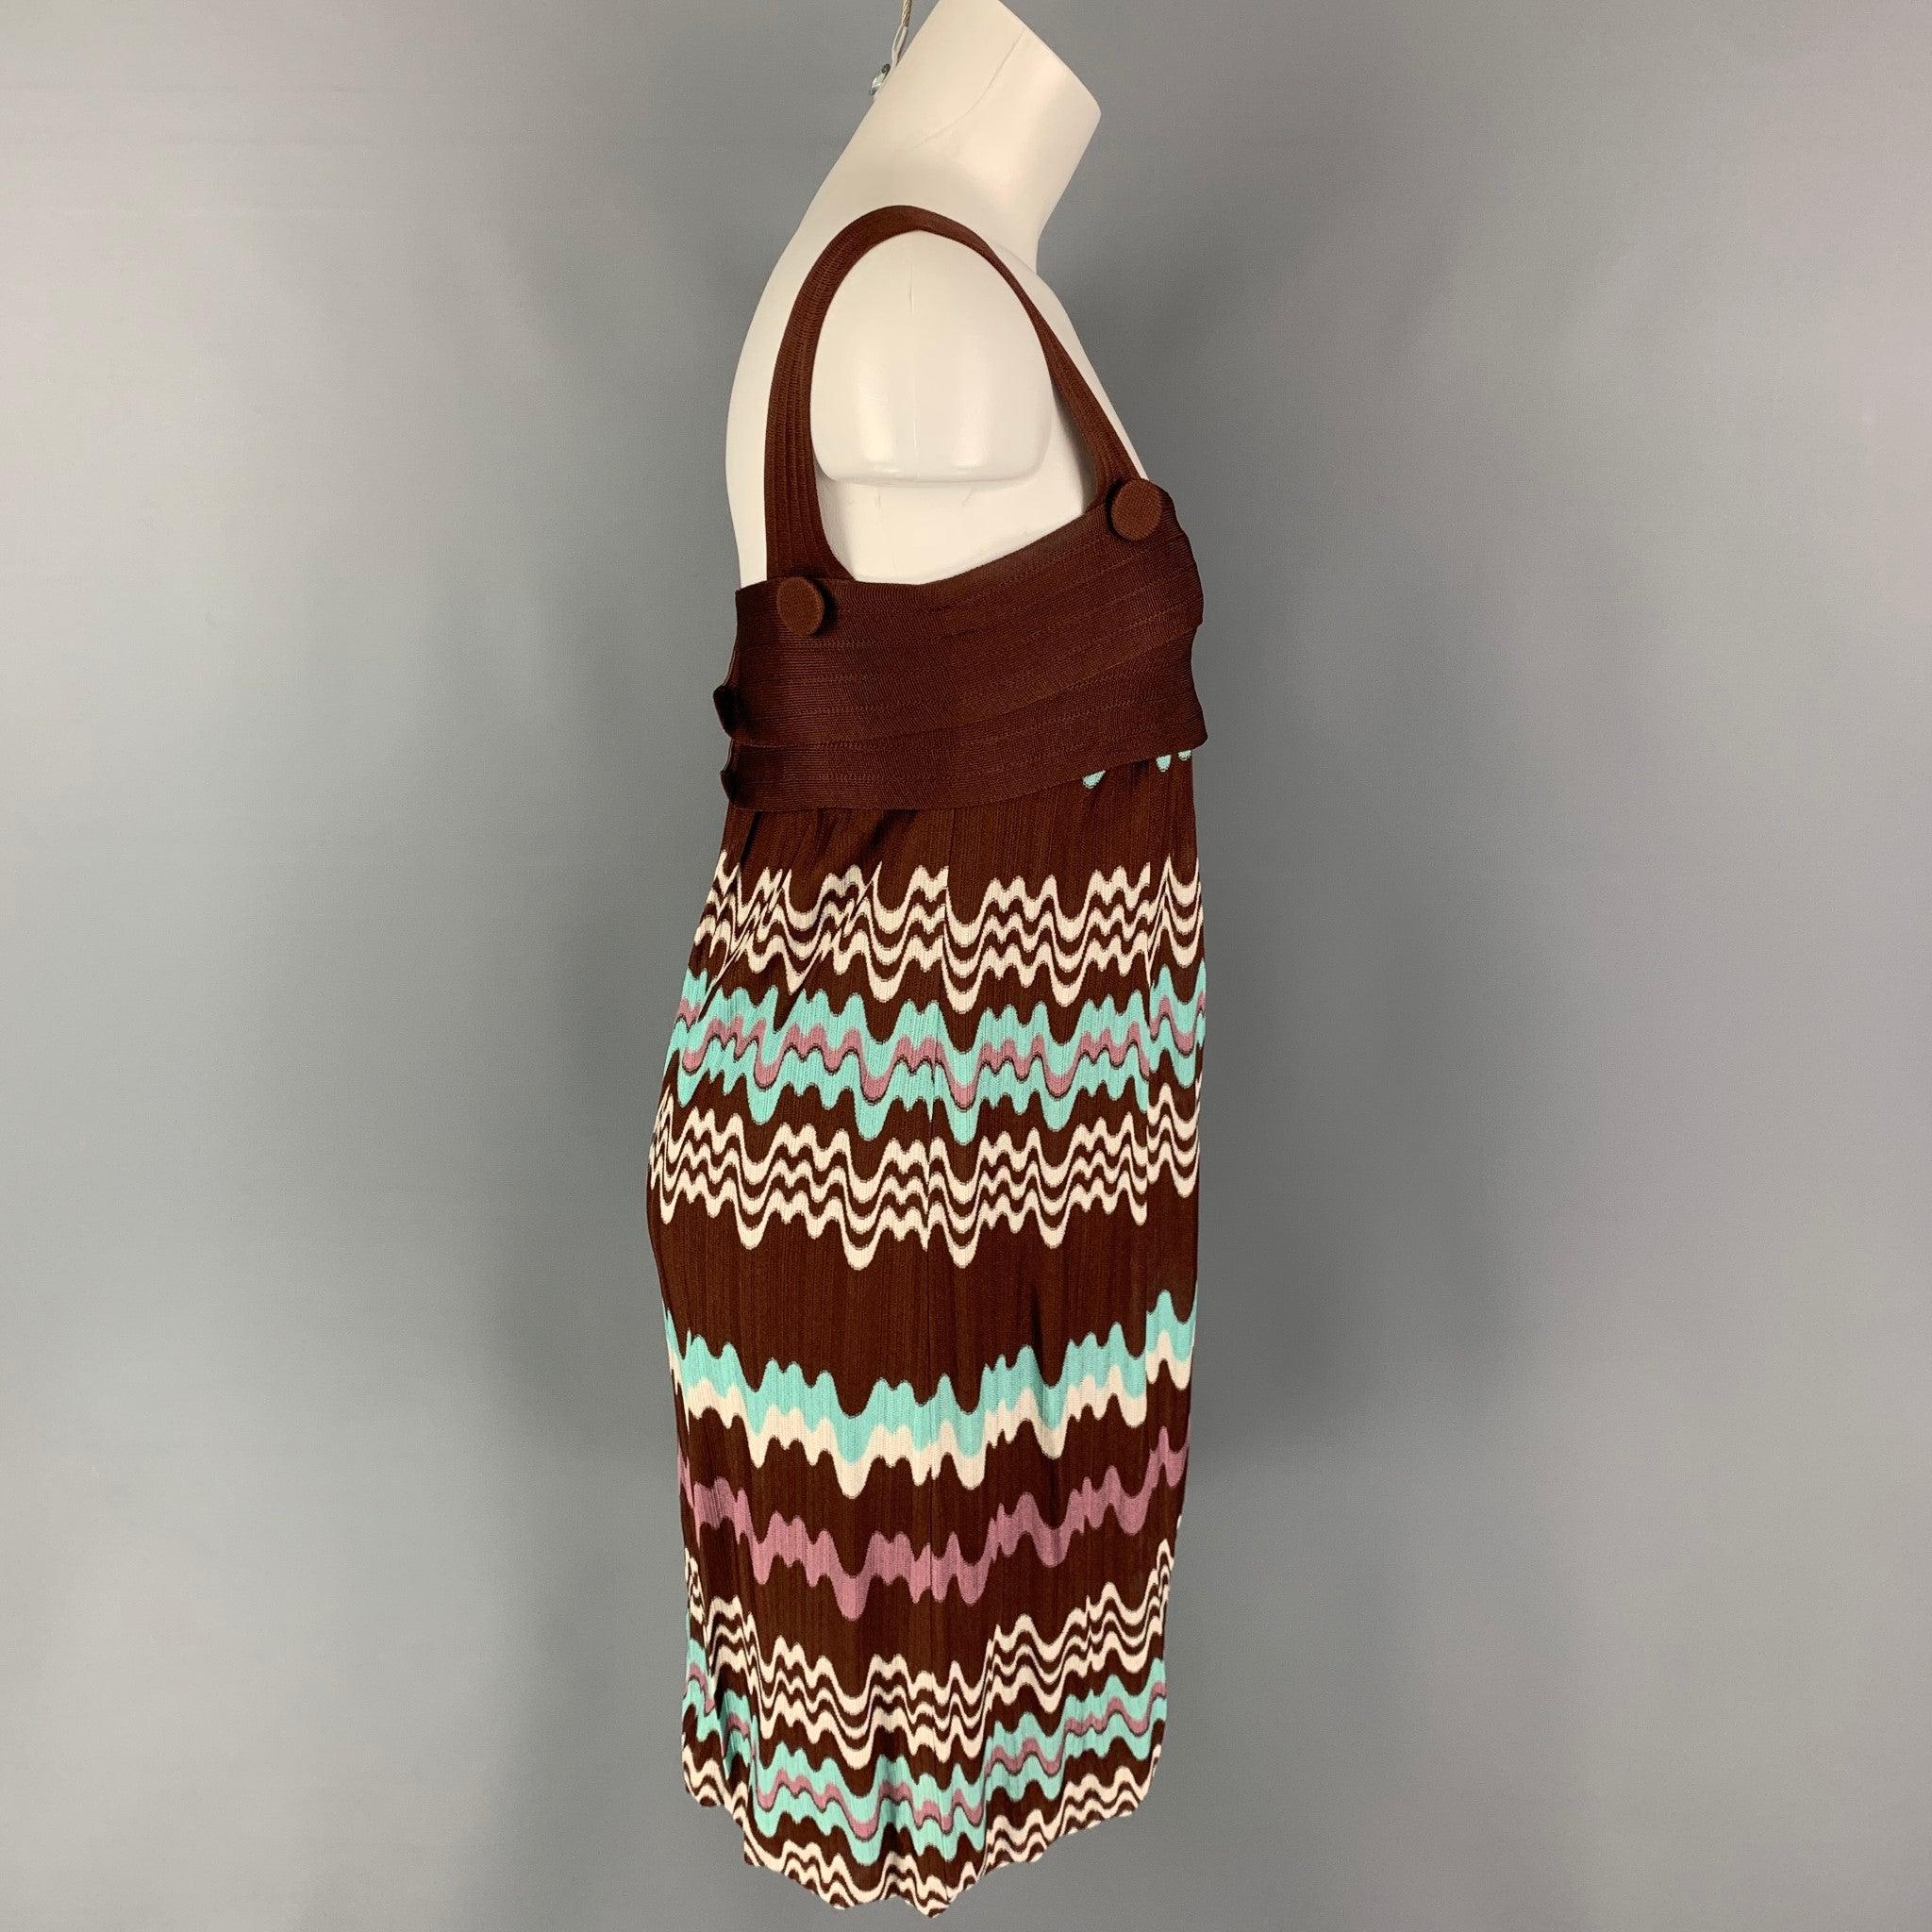 MISSONI dress comes in a brown & blue knitted abstract print stretch rayon featuring a layered panel, button details, and thick straps.
Very Good
Pre-Owned Condition. 

Marked:   38 

Measurements: 
  Bust: 28 inches Hip: 34 inches Length: 29 inches